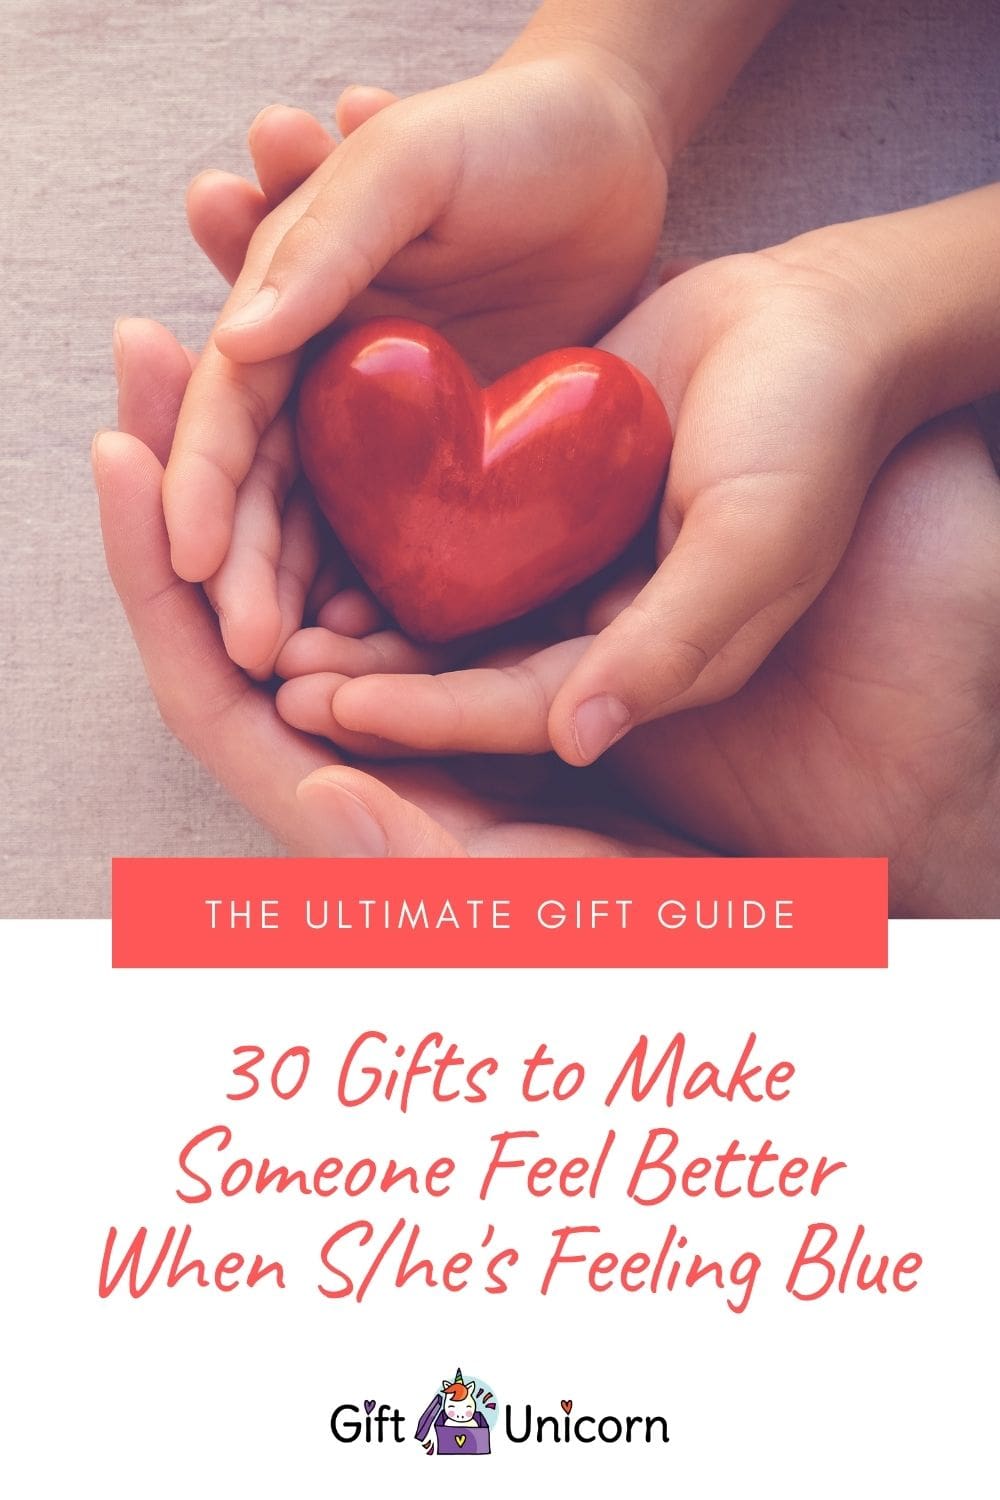 30 GIFTS to make someone feel better